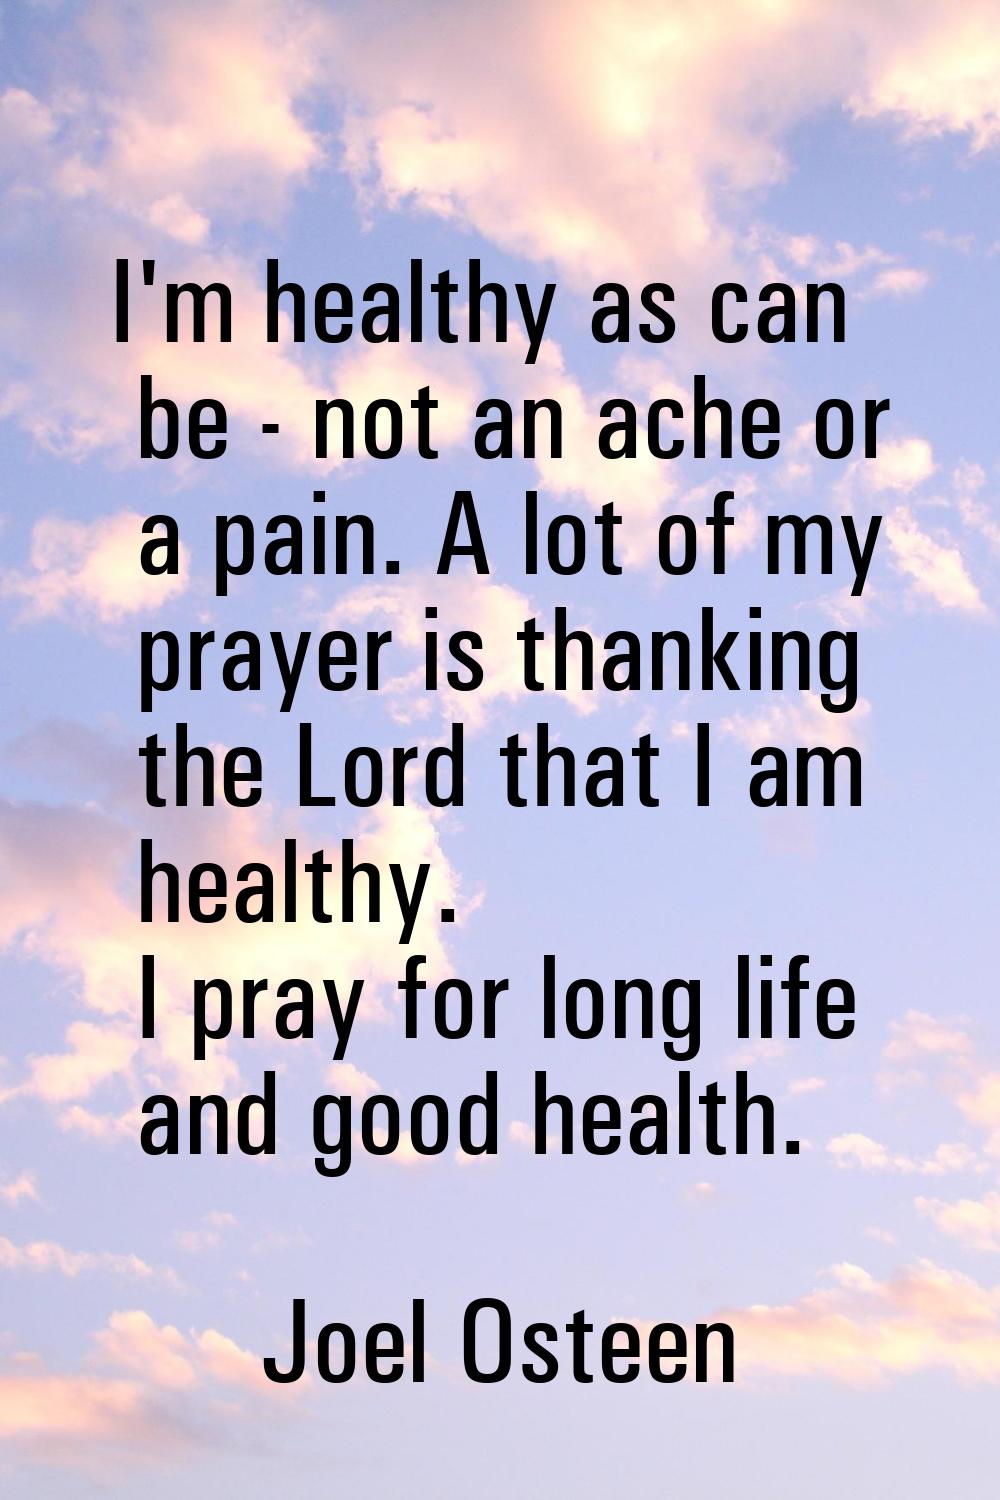 I'm healthy as can be - not an ache or a pain. A lot of my prayer is thanking the Lord that I am he